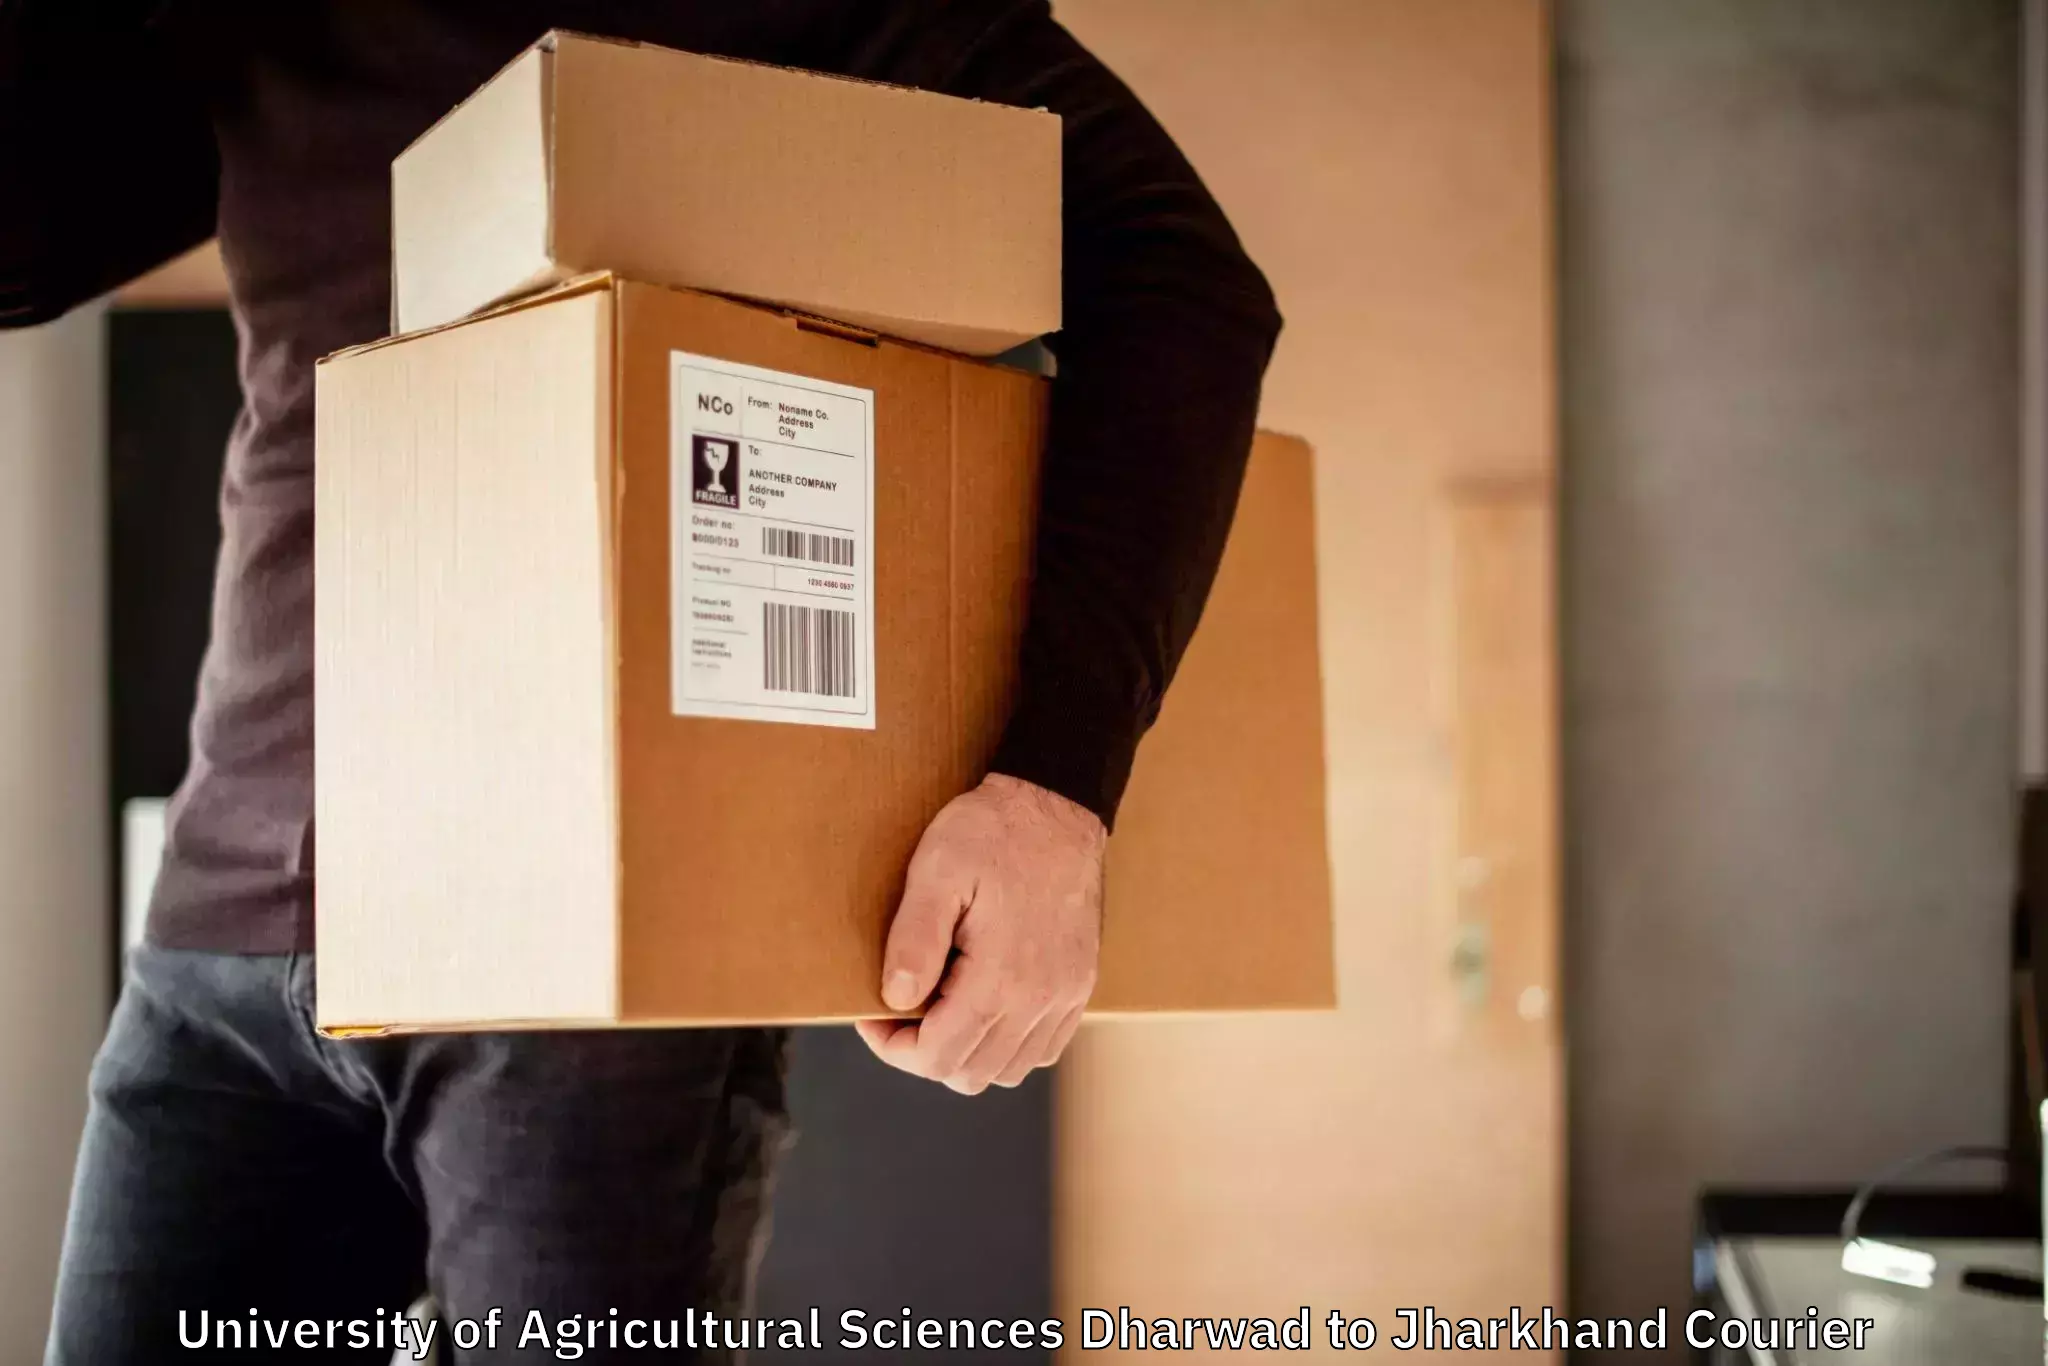 Specialized shipment handling in University of Agricultural Sciences Dharwad to Jharkhand